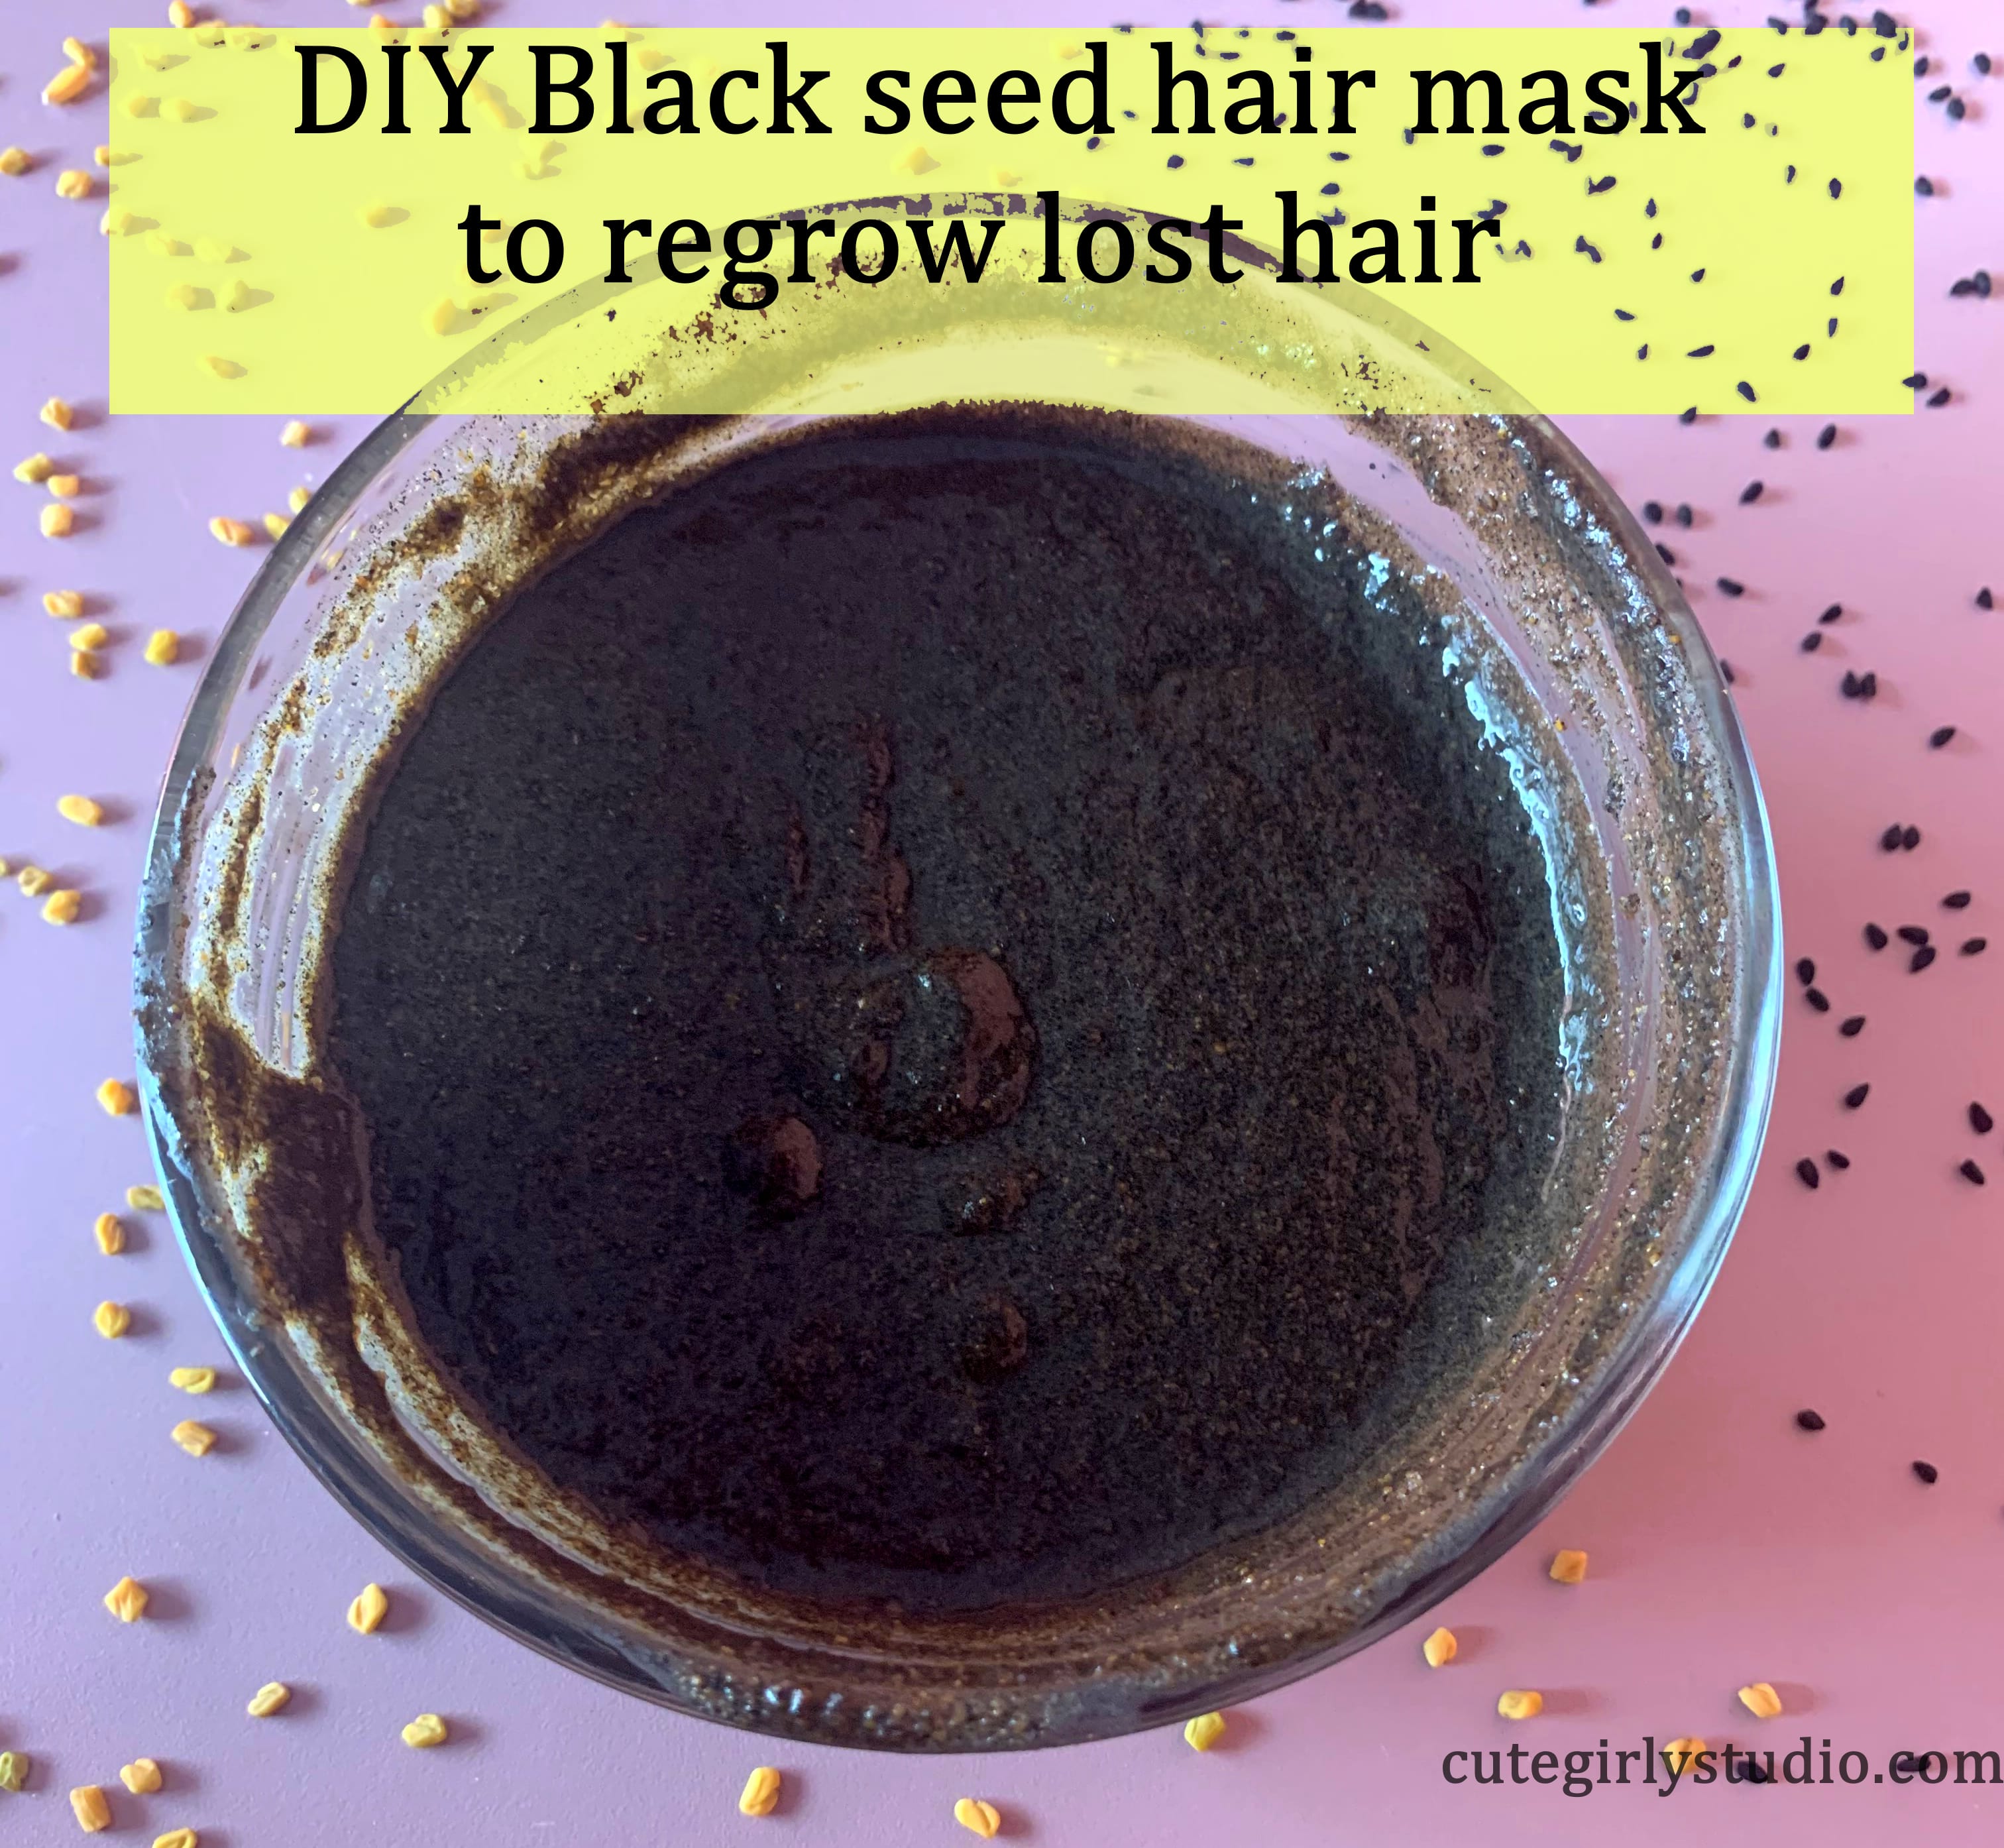 DIY black seed hair mask to regrow lost hair - featured